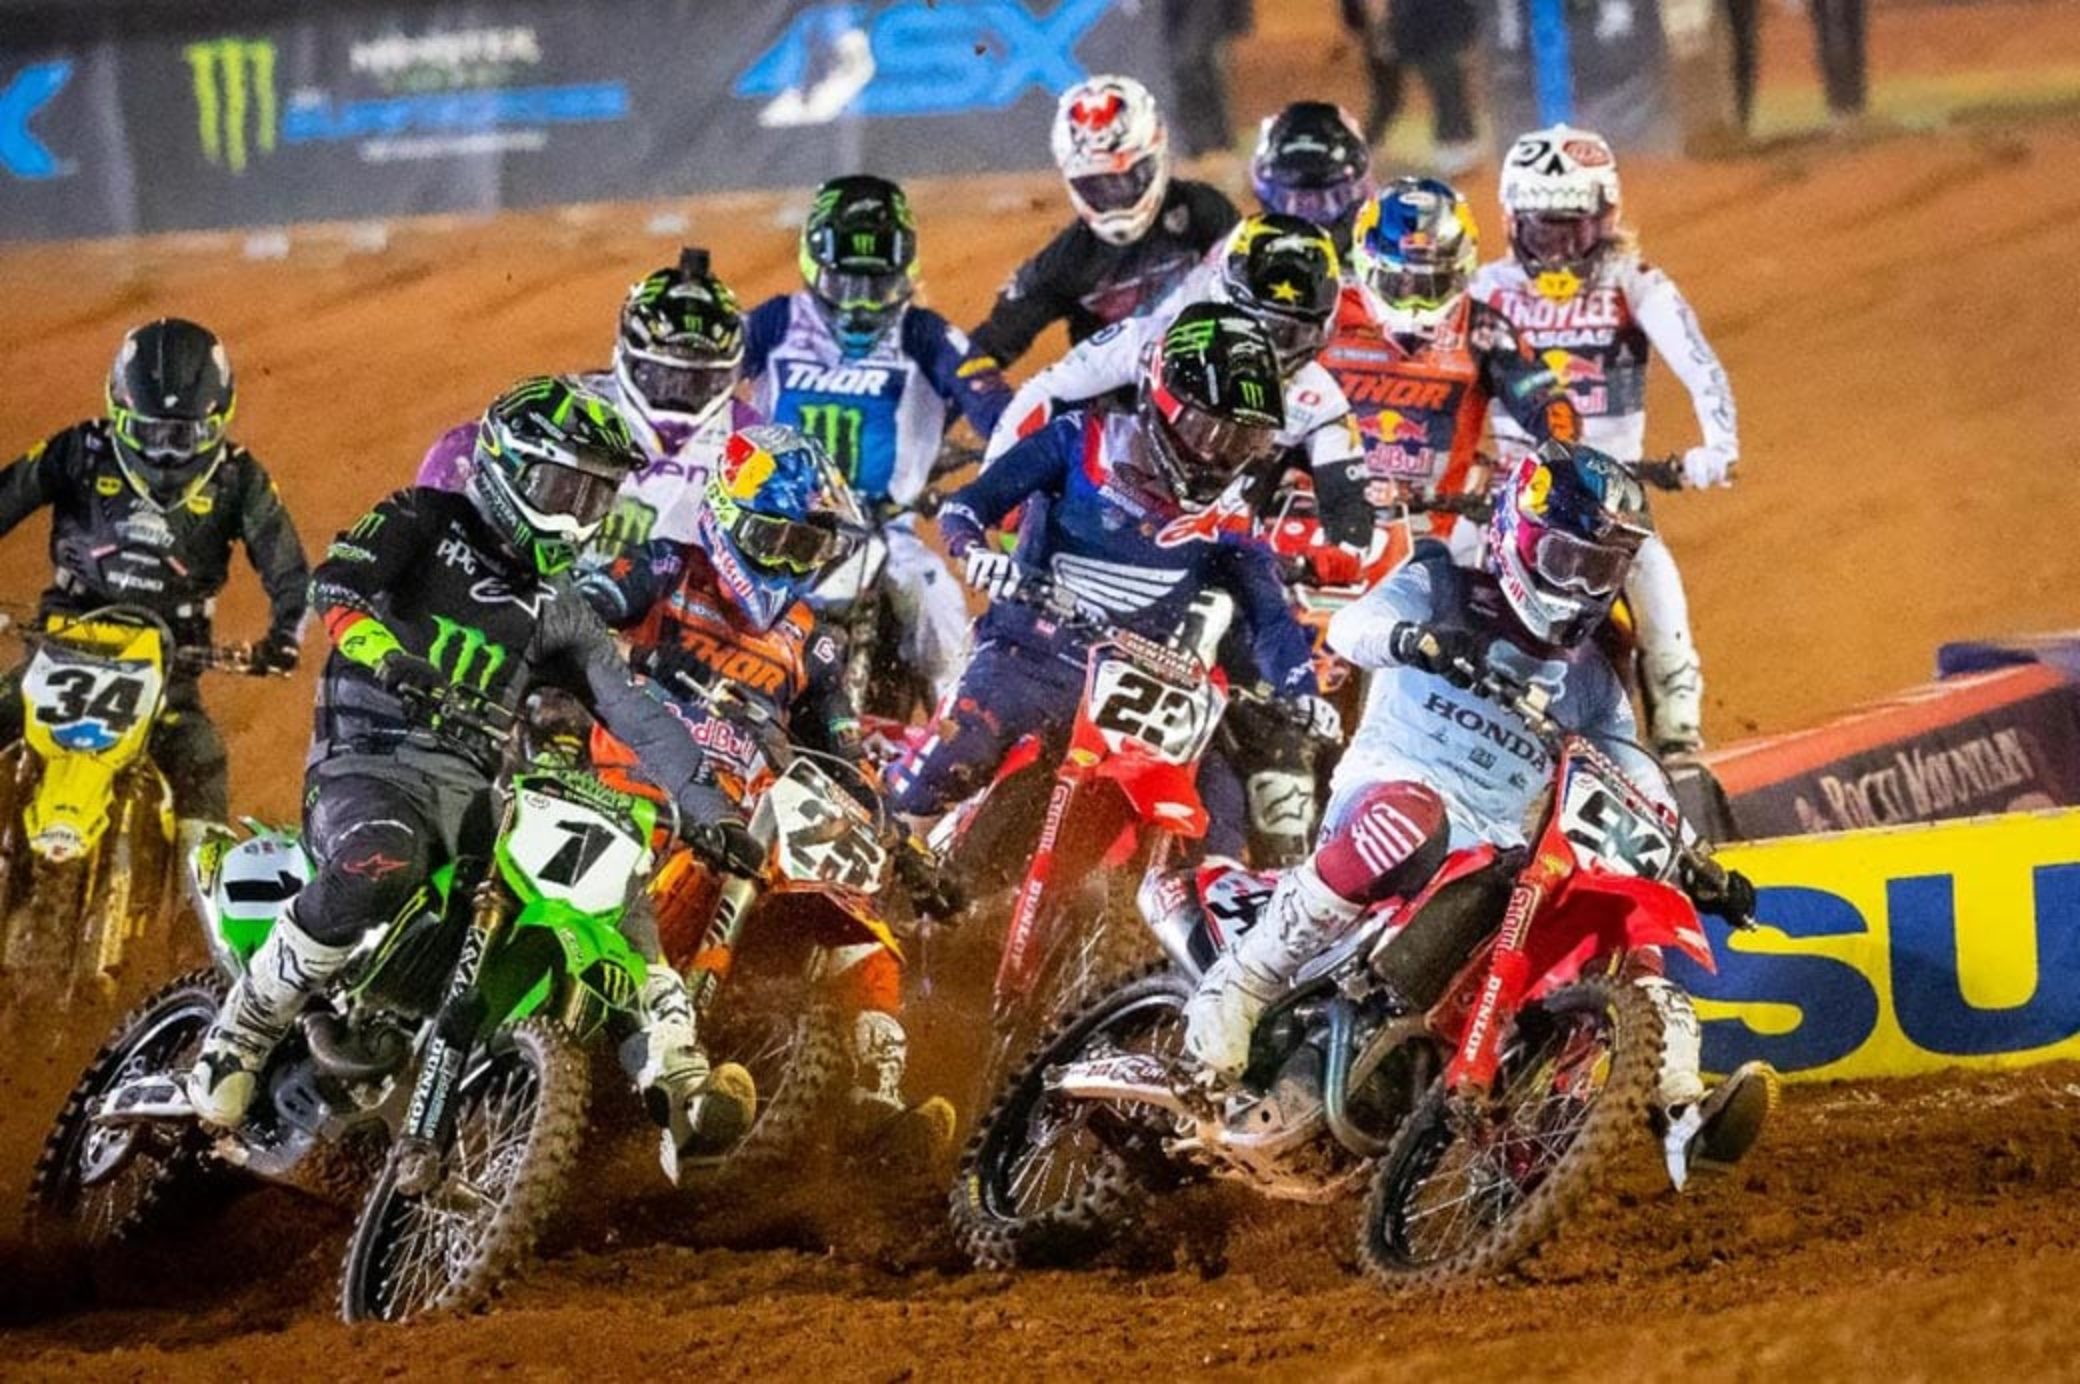 Atlanta 2 Supercross Race Report and Results